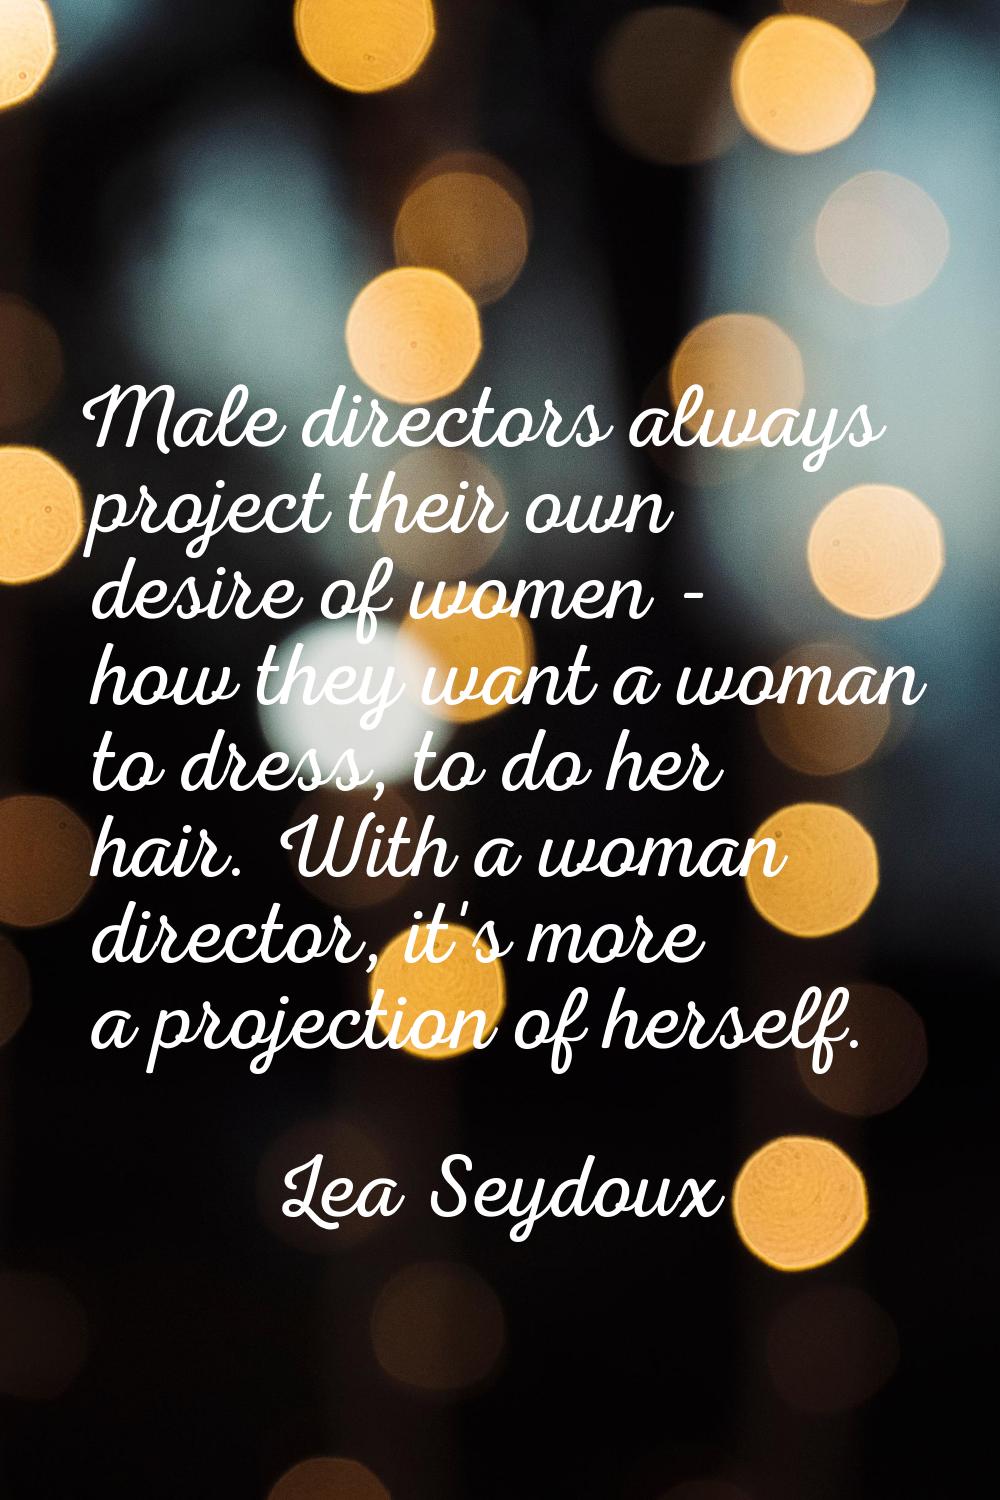 Male directors always project their own desire of women - how they want a woman to dress, to do her